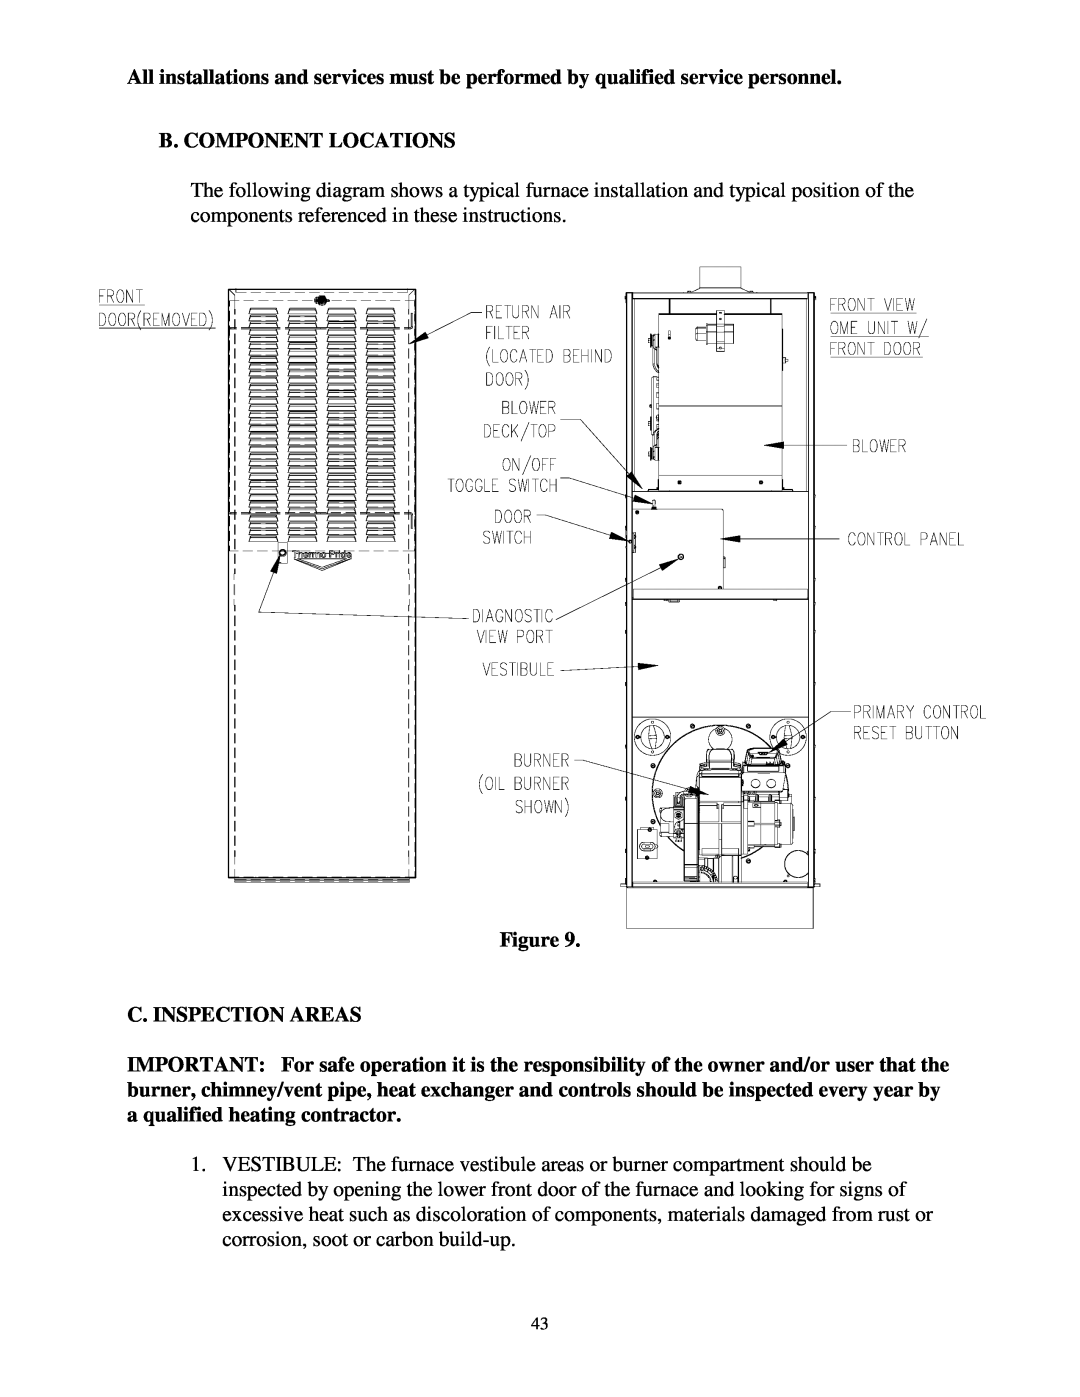 Thermo Products ome-72d36 service manual B. Component Locations, Figure C. INSPECTION AREAS 